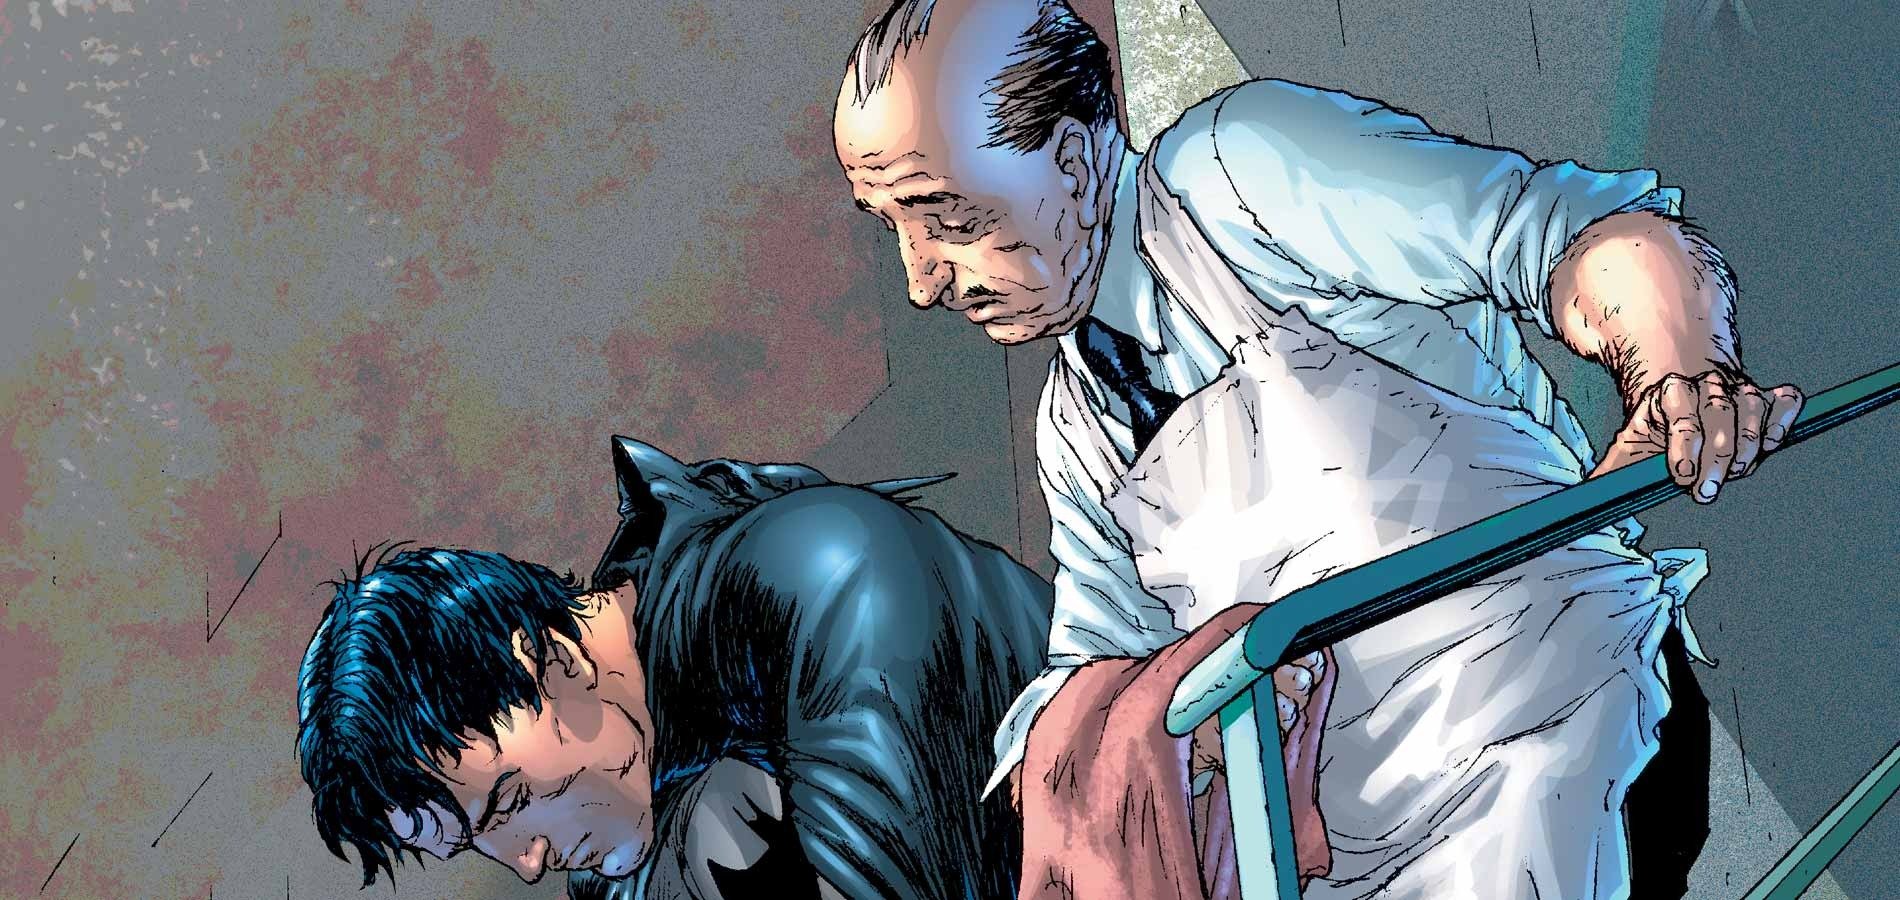 How many Navy Seals would it take to beat Alfred Pennyworth? 